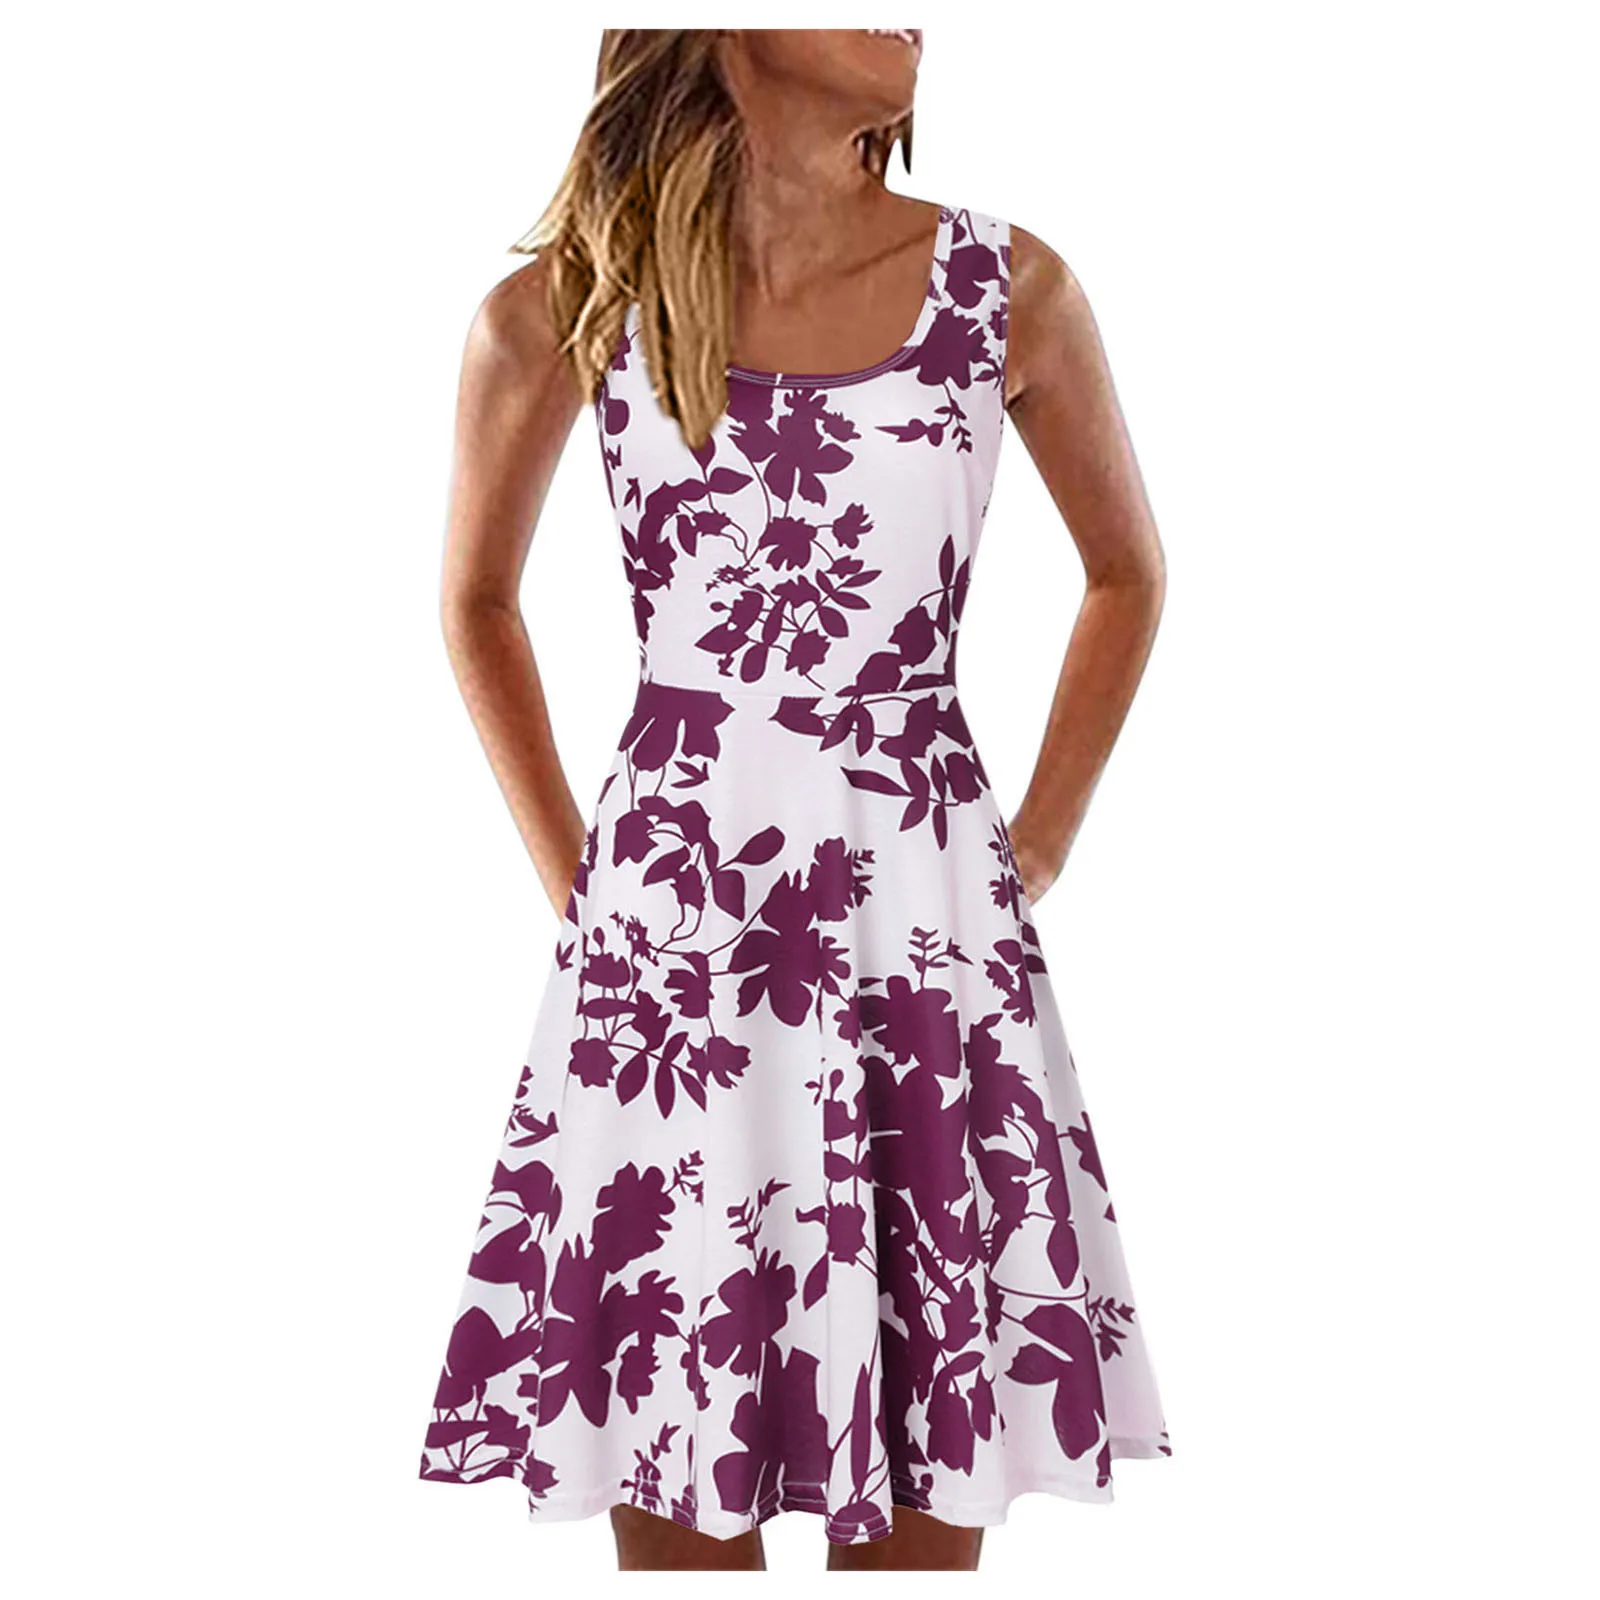 Backless Ladies Summer Dress Sexy Sleeveless U-Neck A-line Short Casual Sundress Floral Printed Loose Vintage Women Dresses 4